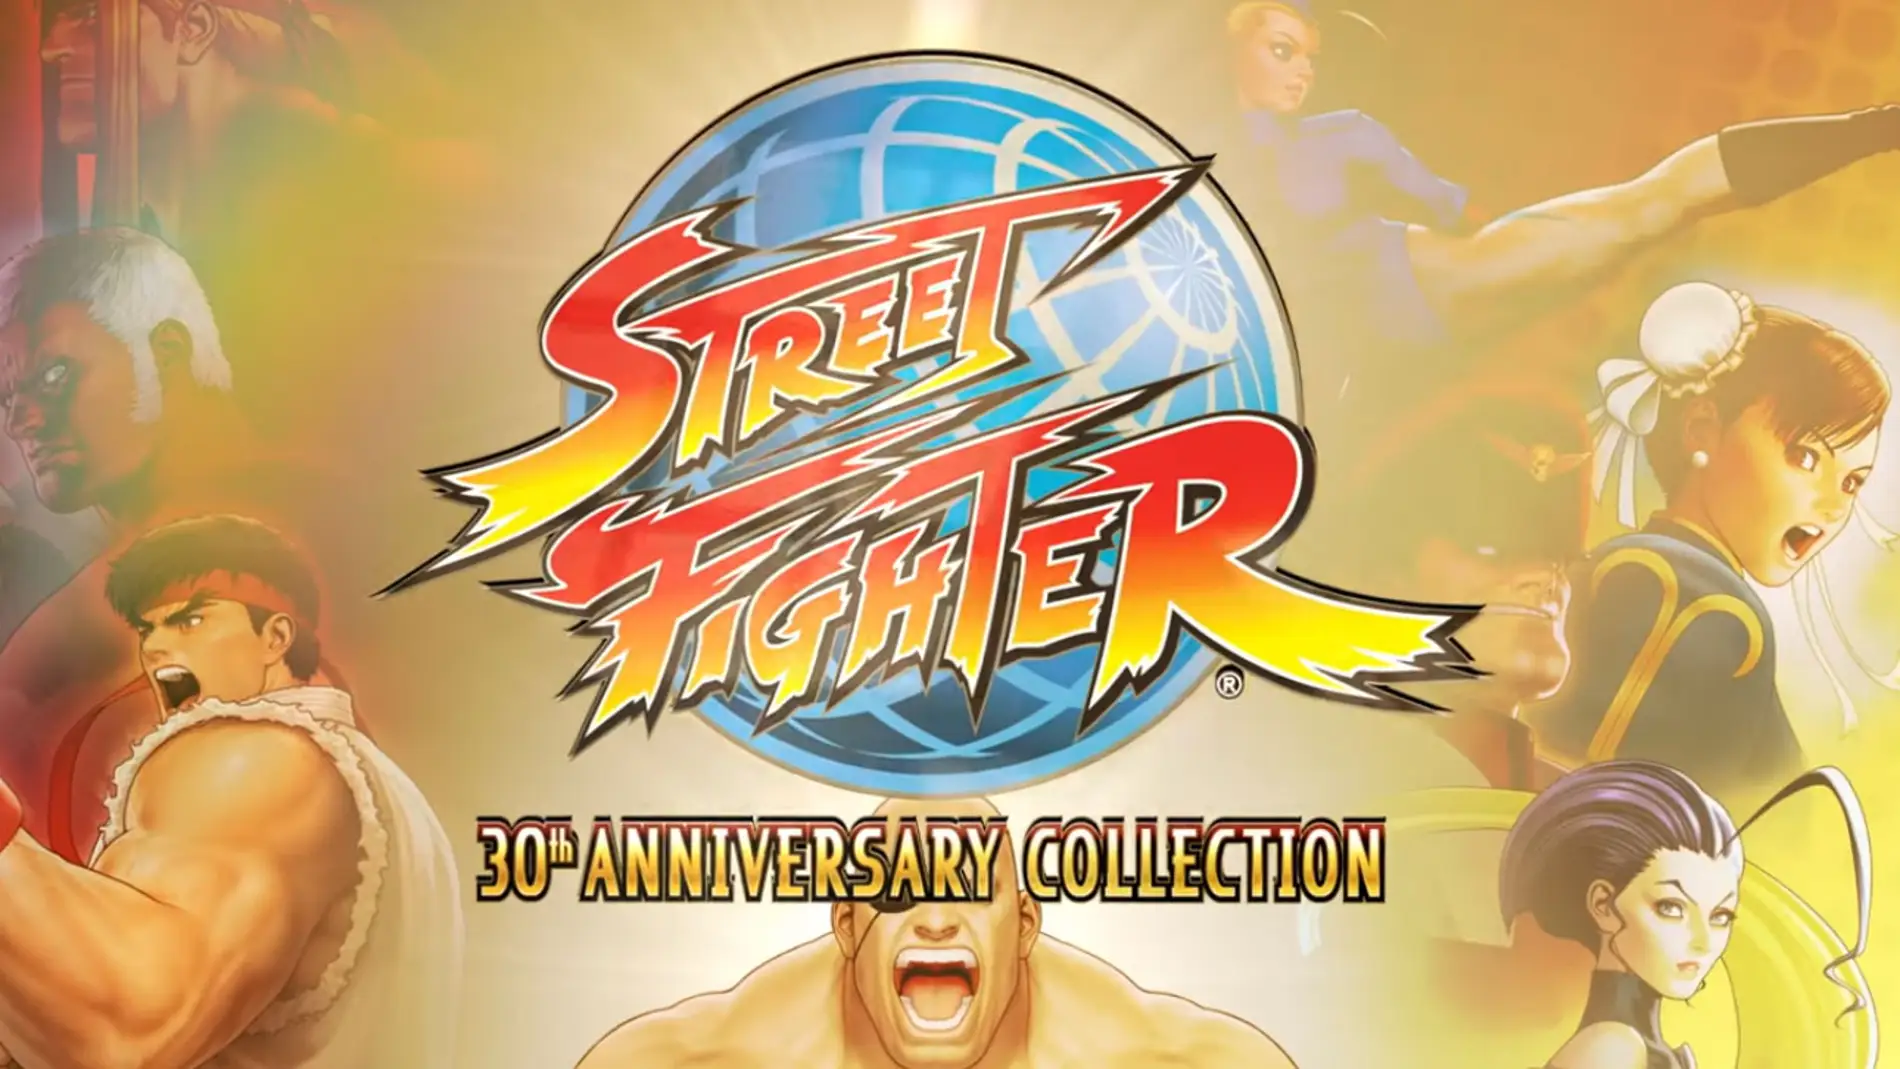 Street Fighter 30 Anniversary Collection